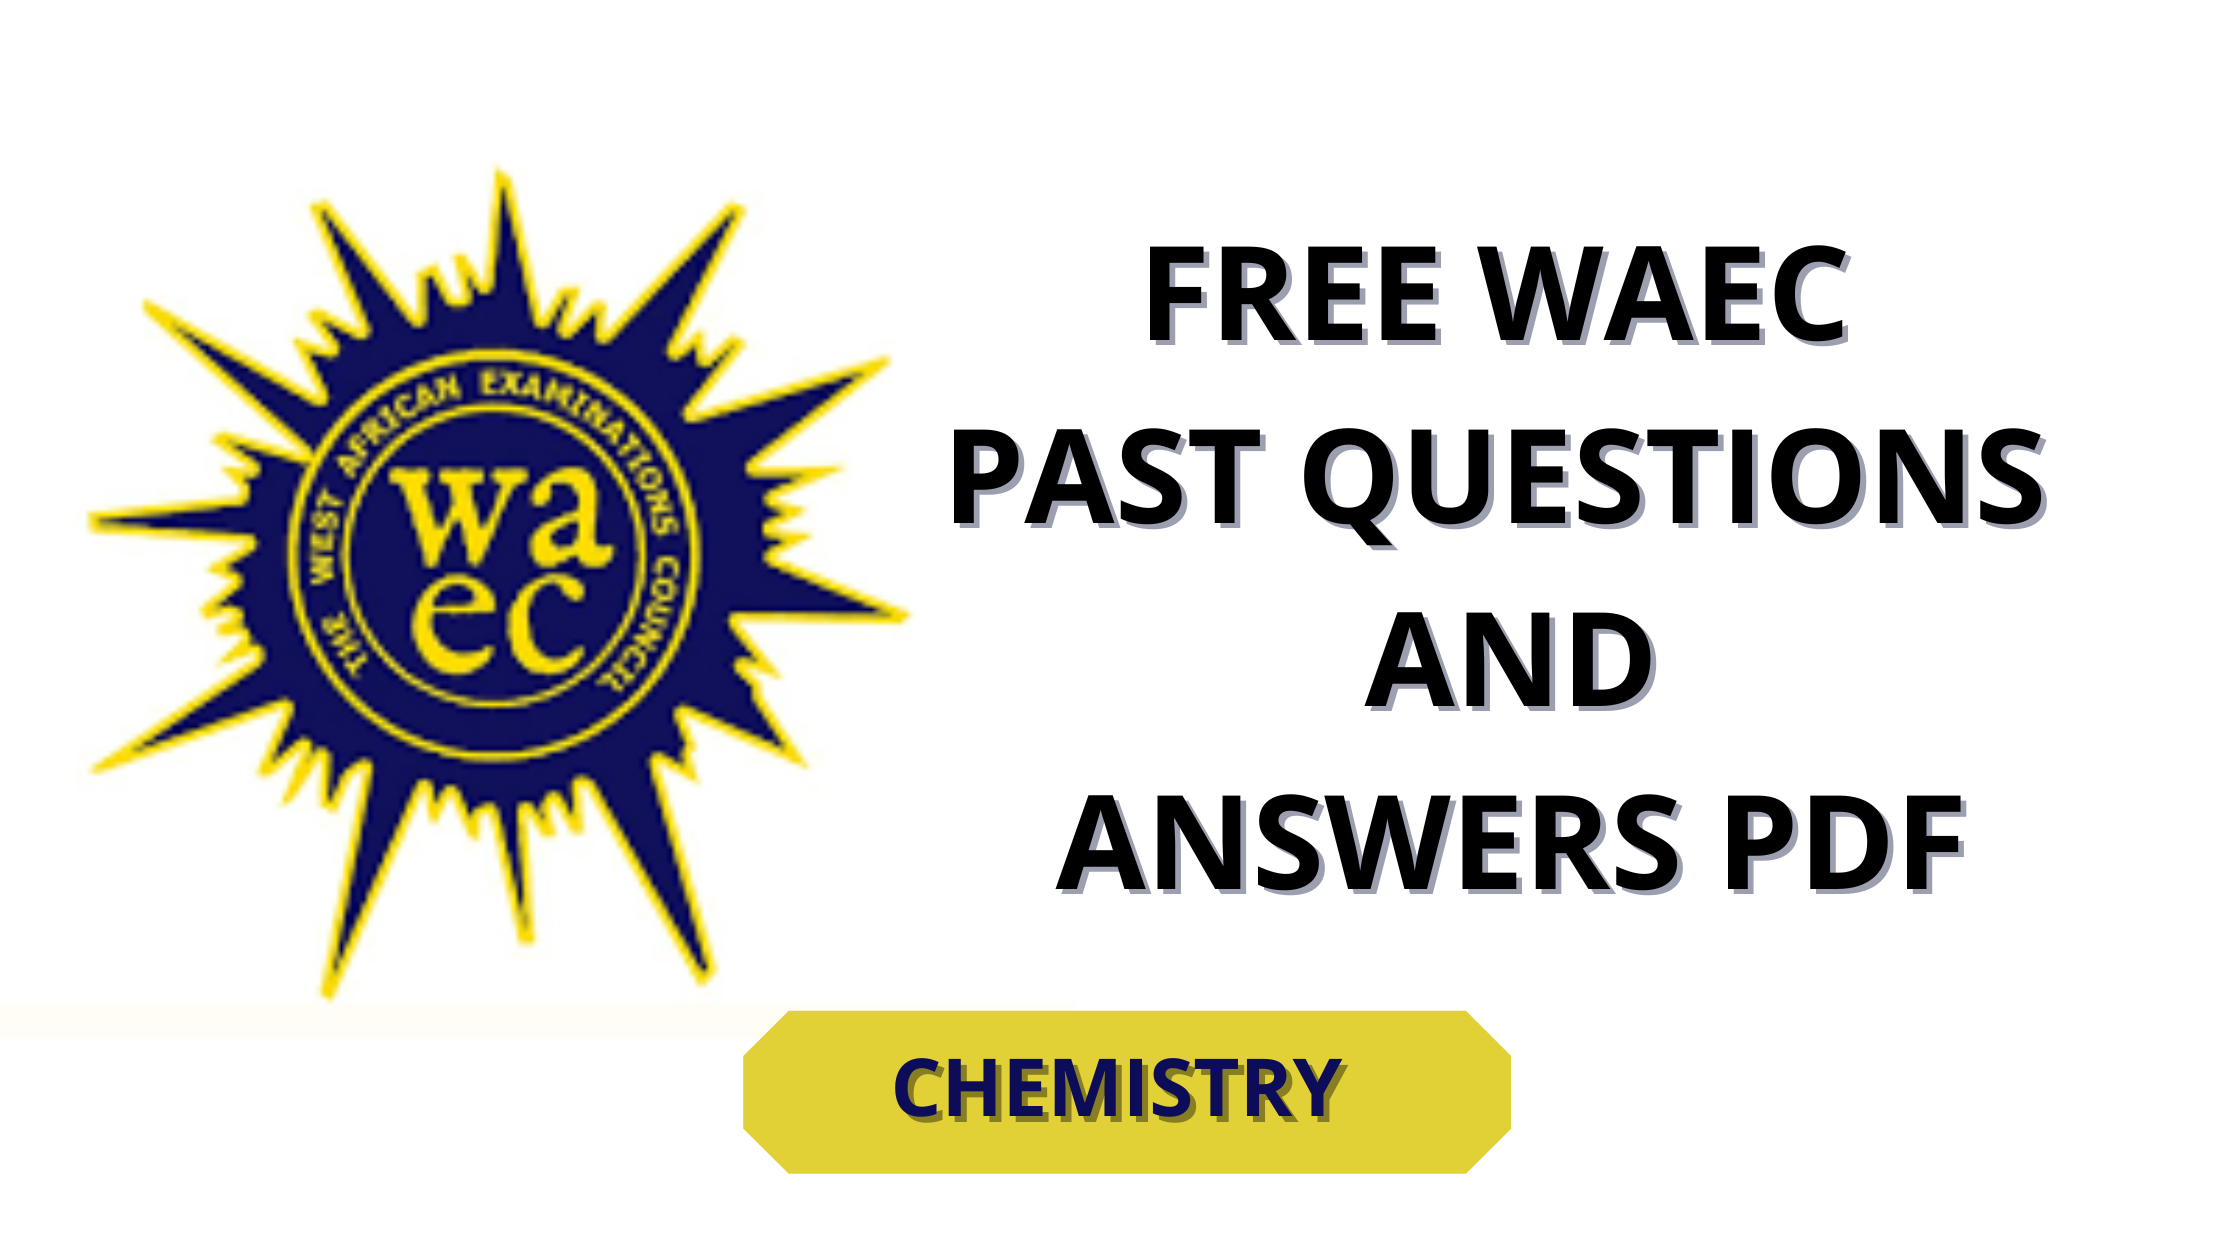 Chemistry WAEC Past Questions | FREE DOWNLOAD